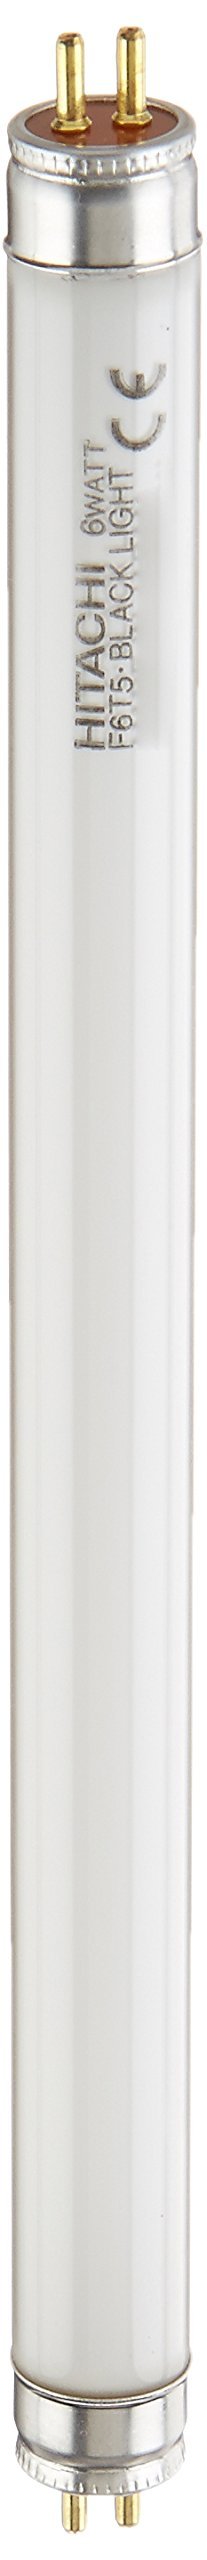 UVP 34-0034-01 Replacement UV Tube for EL Series UV Lamps, 9" Length, 365nm Longwave, 6W